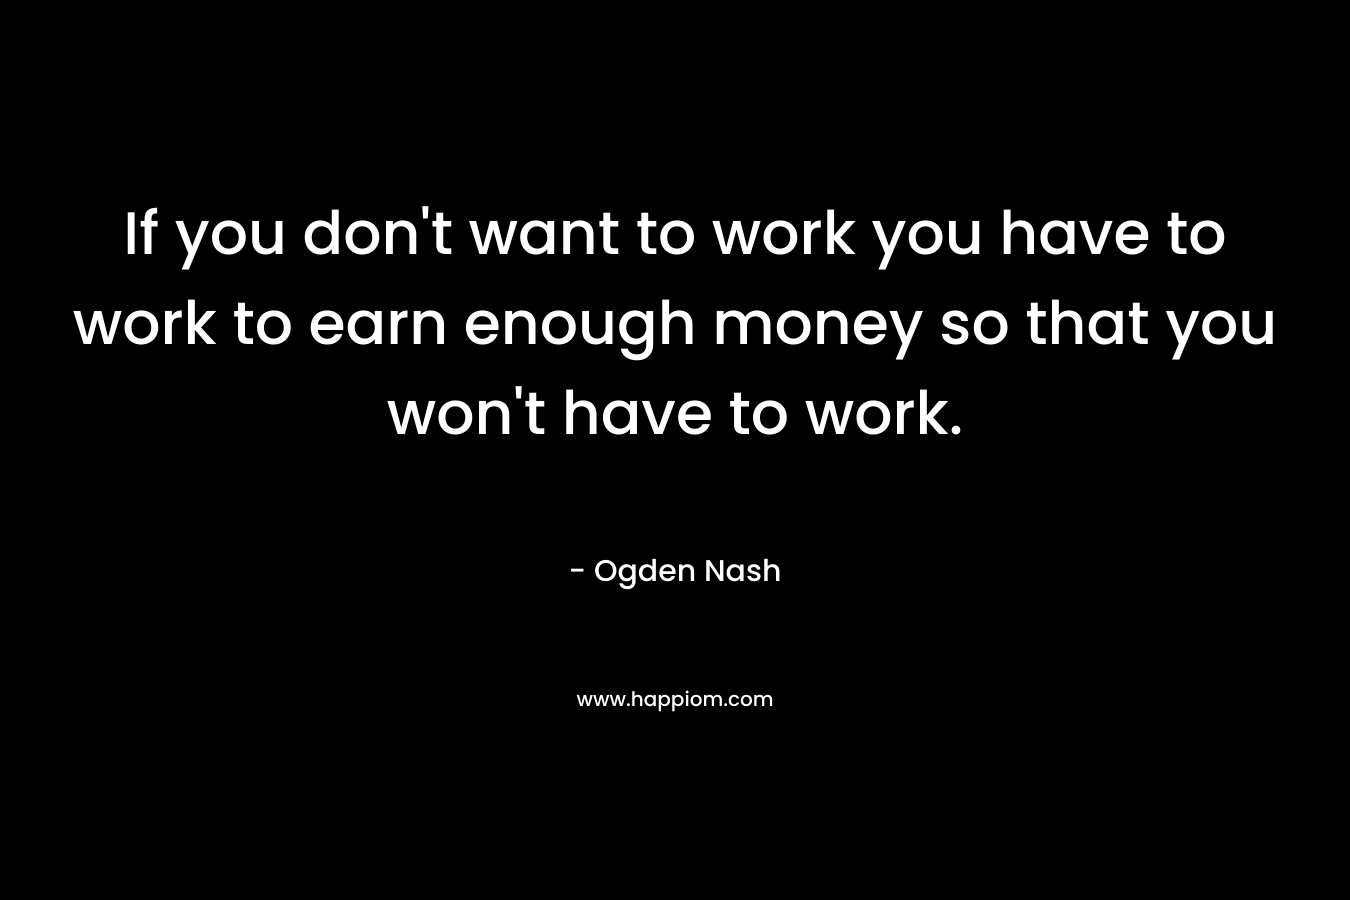 If you don't want to work you have to work to earn enough money so that you won't have to work.